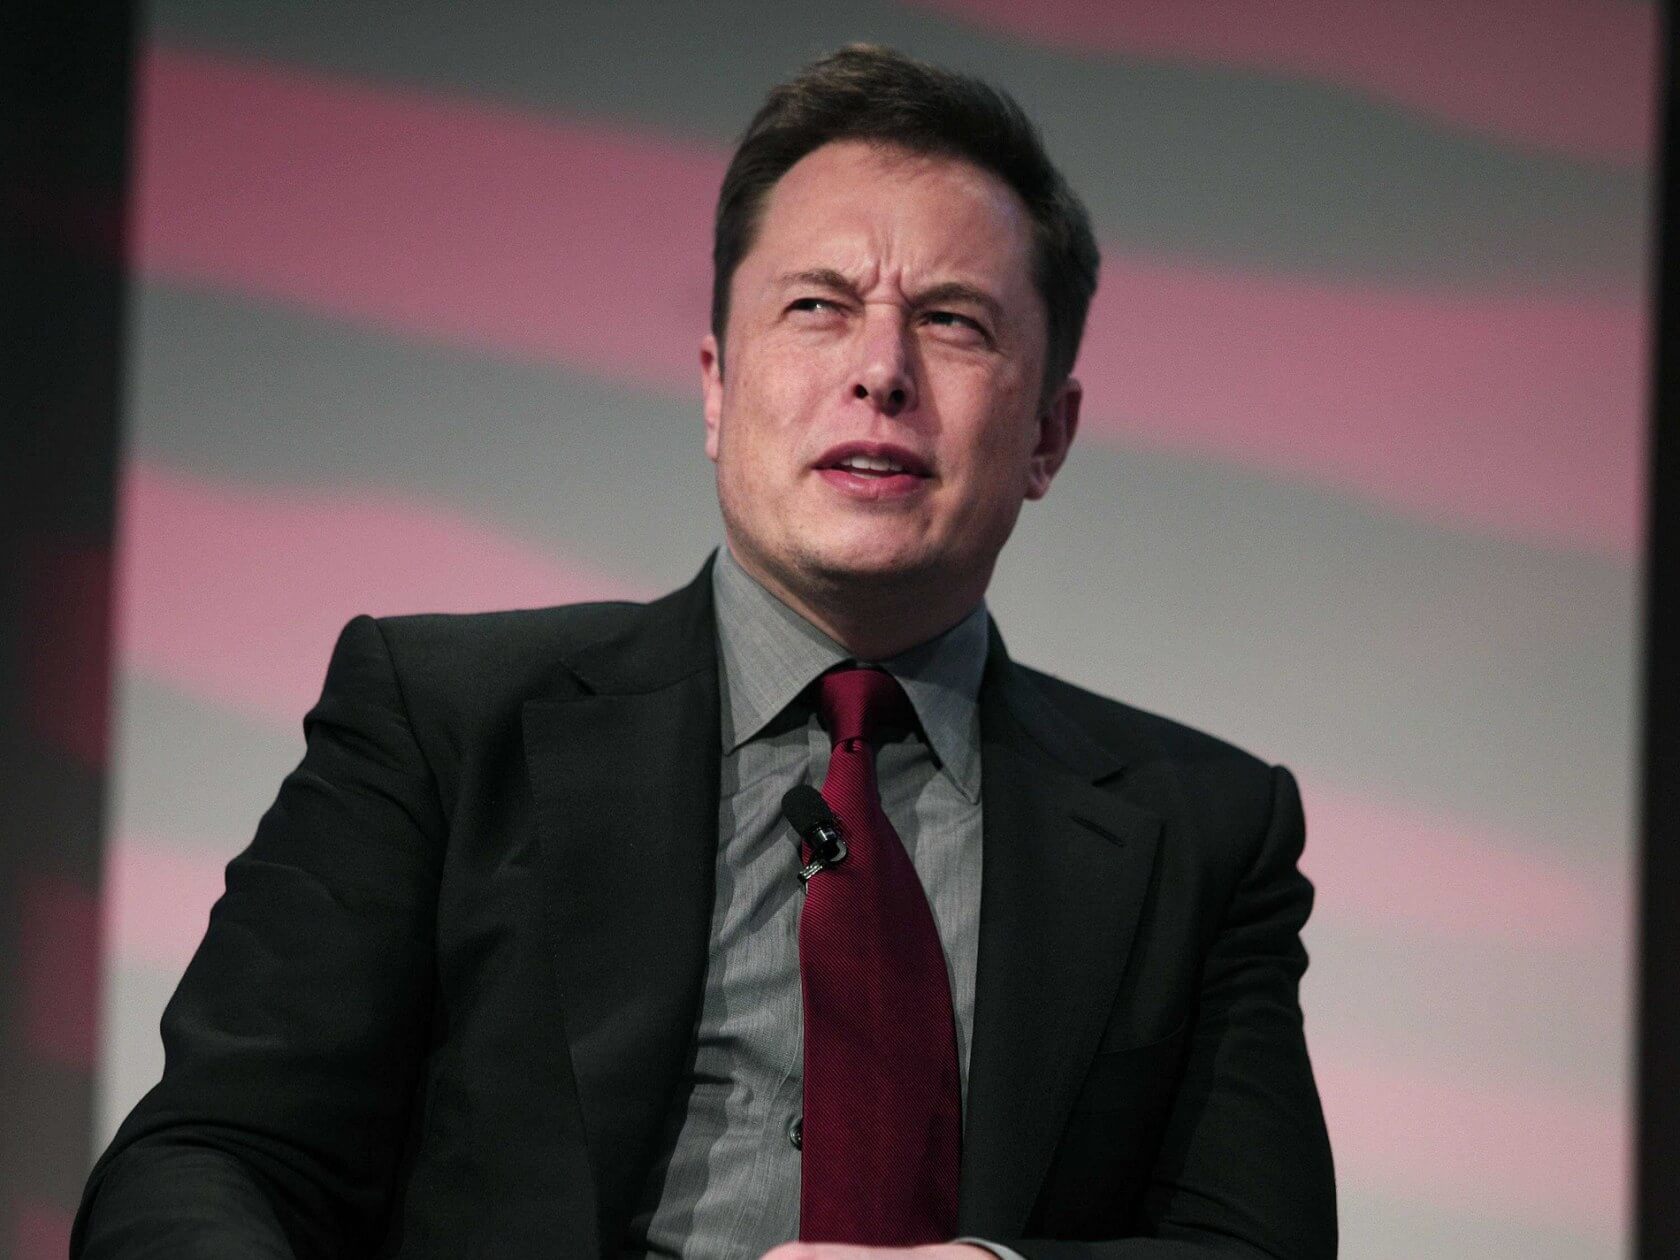 Elon Musk posts memes about collapsed Twitter deal as company prepares legal action